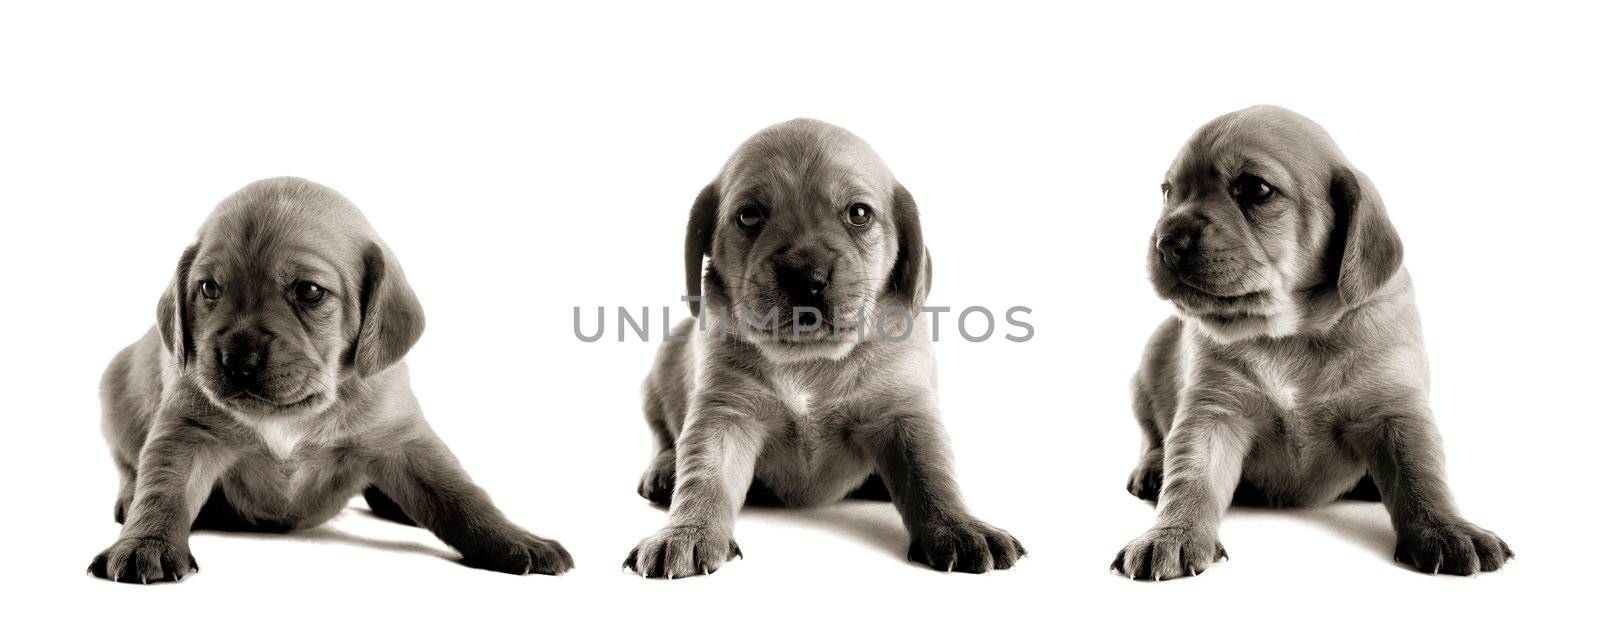 Family of puppies isolated on white background (collage made in PS with 3 pictures)